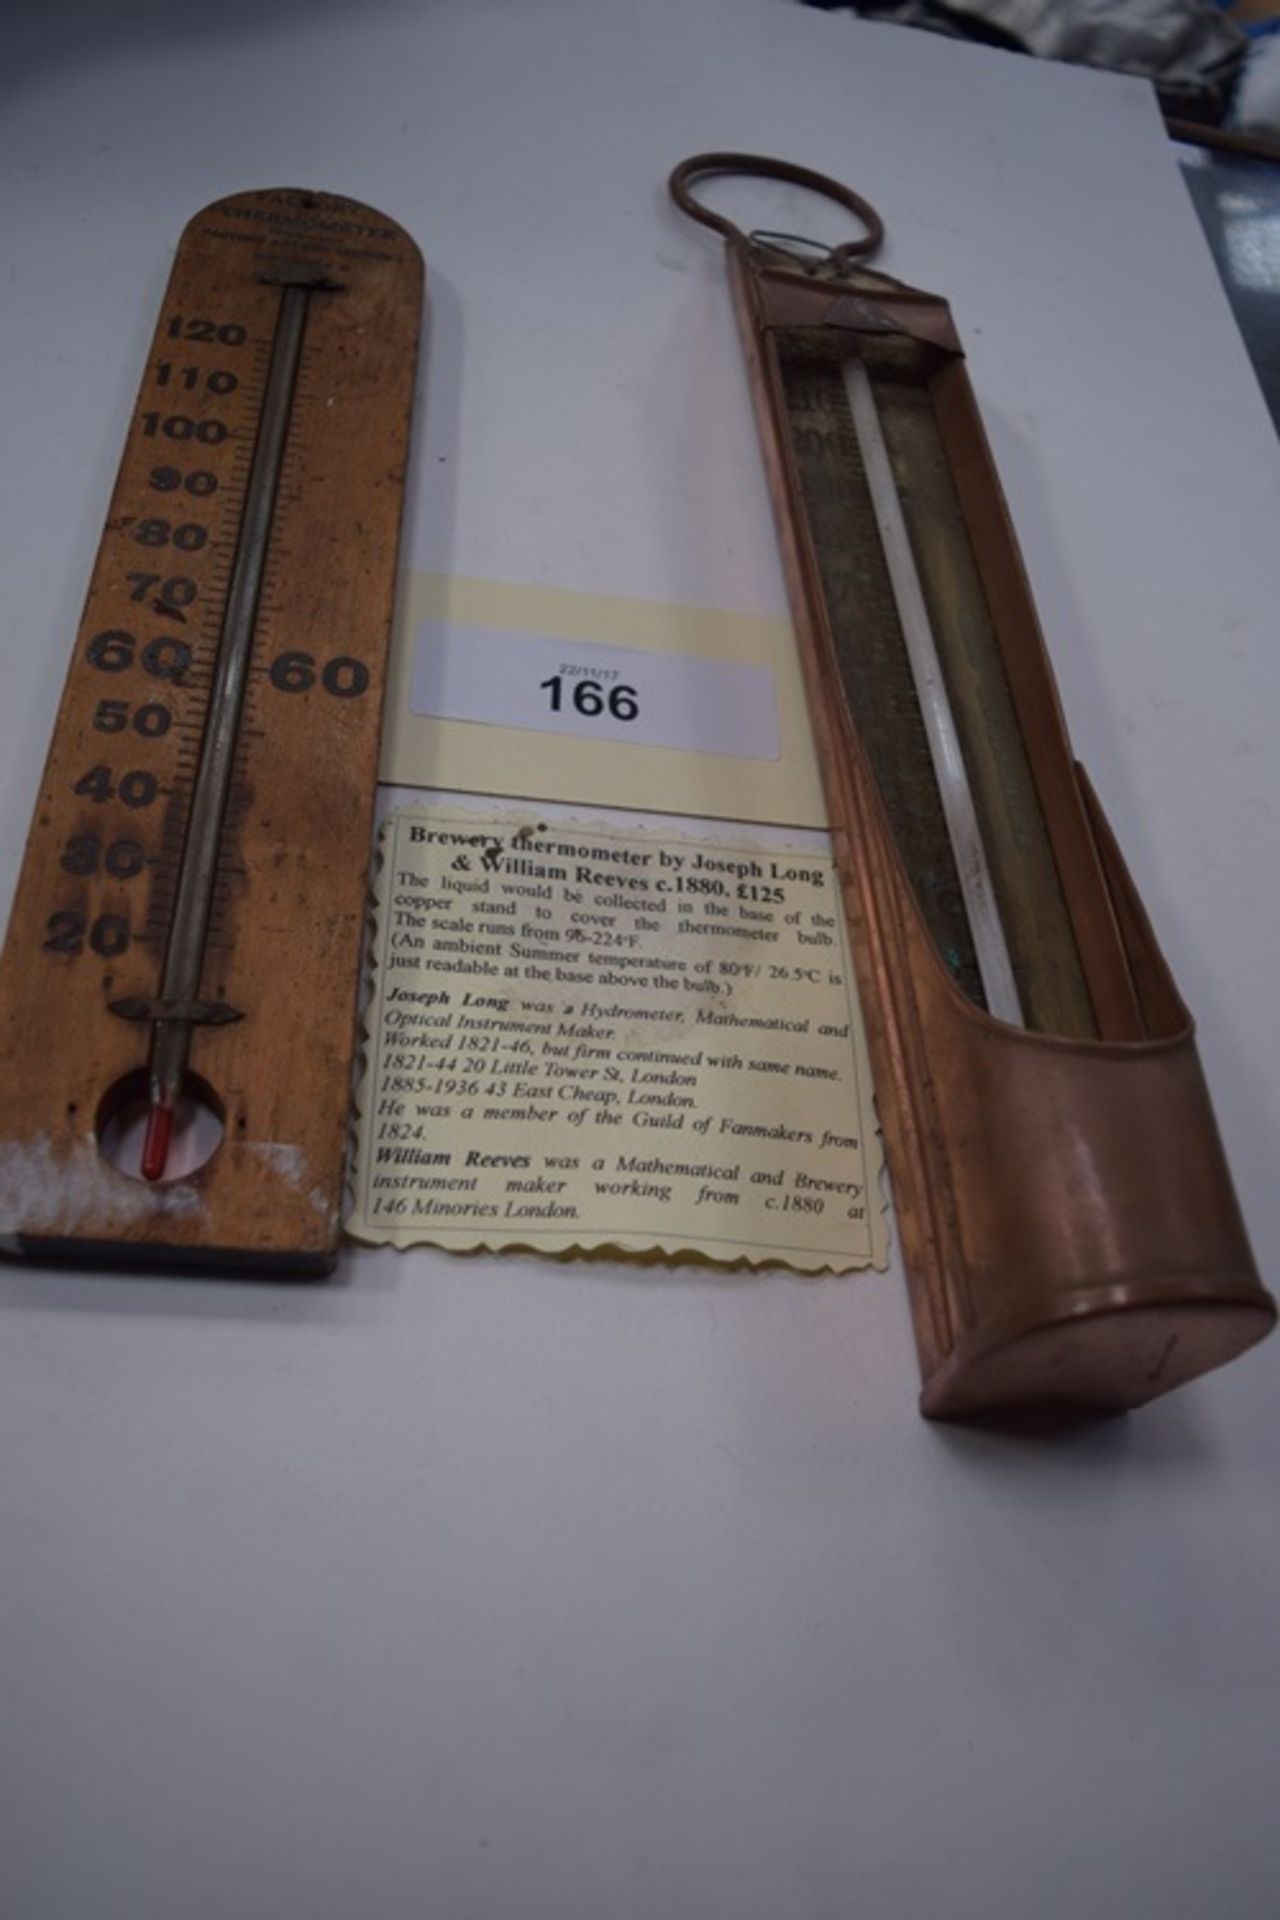 Brewery Thermometer by Joseph Long & William Reeves in cooper fitting and factory thermometer